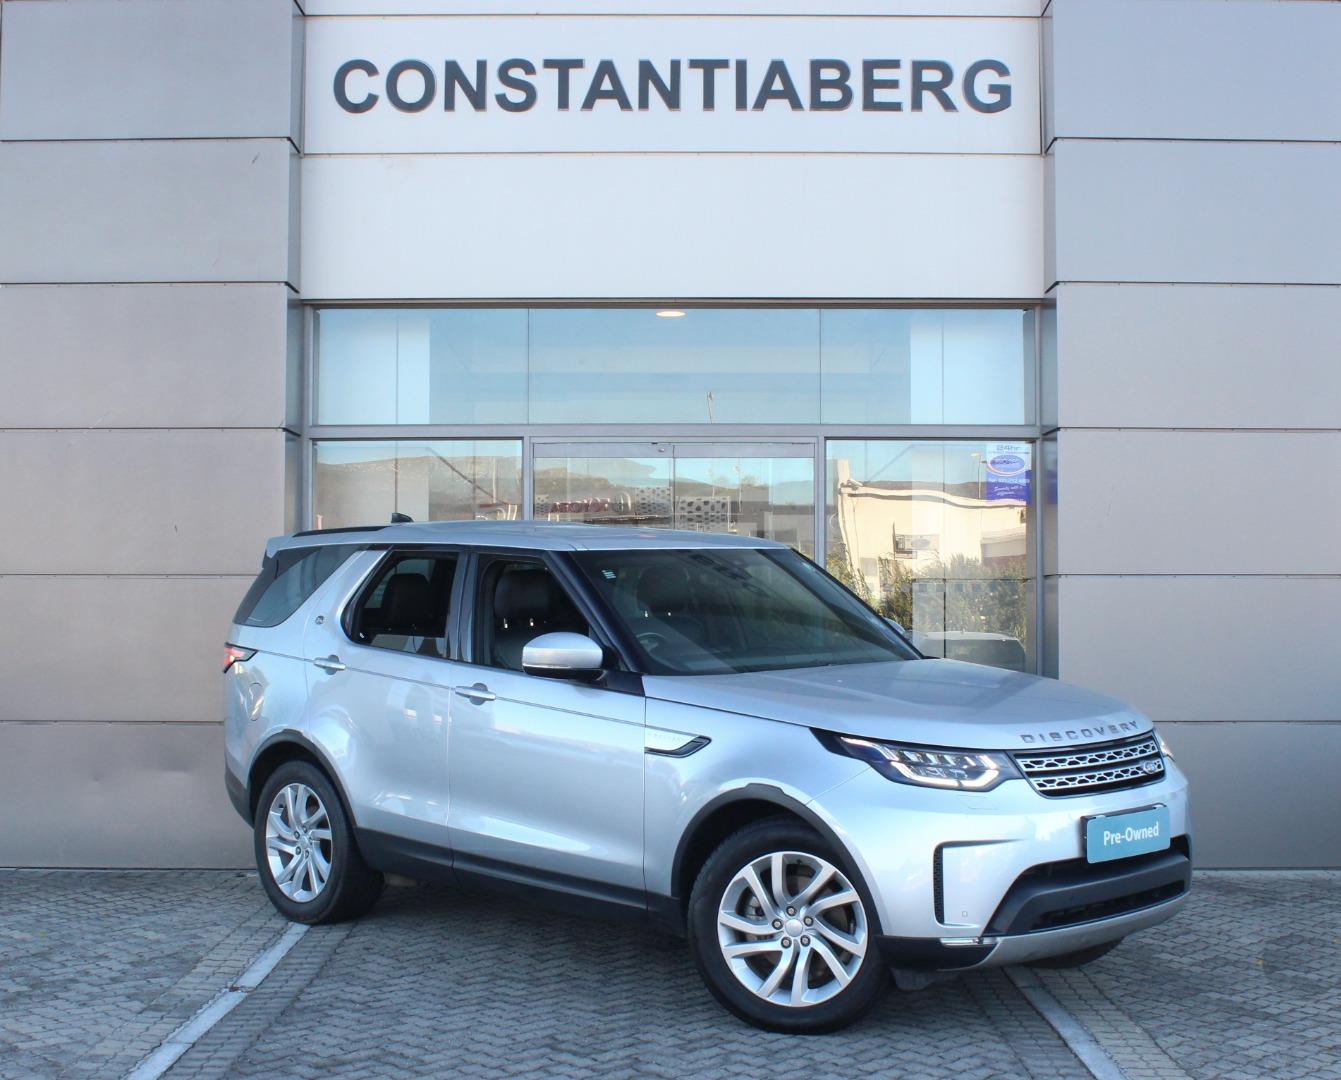 2019 Land Rover Discovery  for sale - SMG11|USED|125483